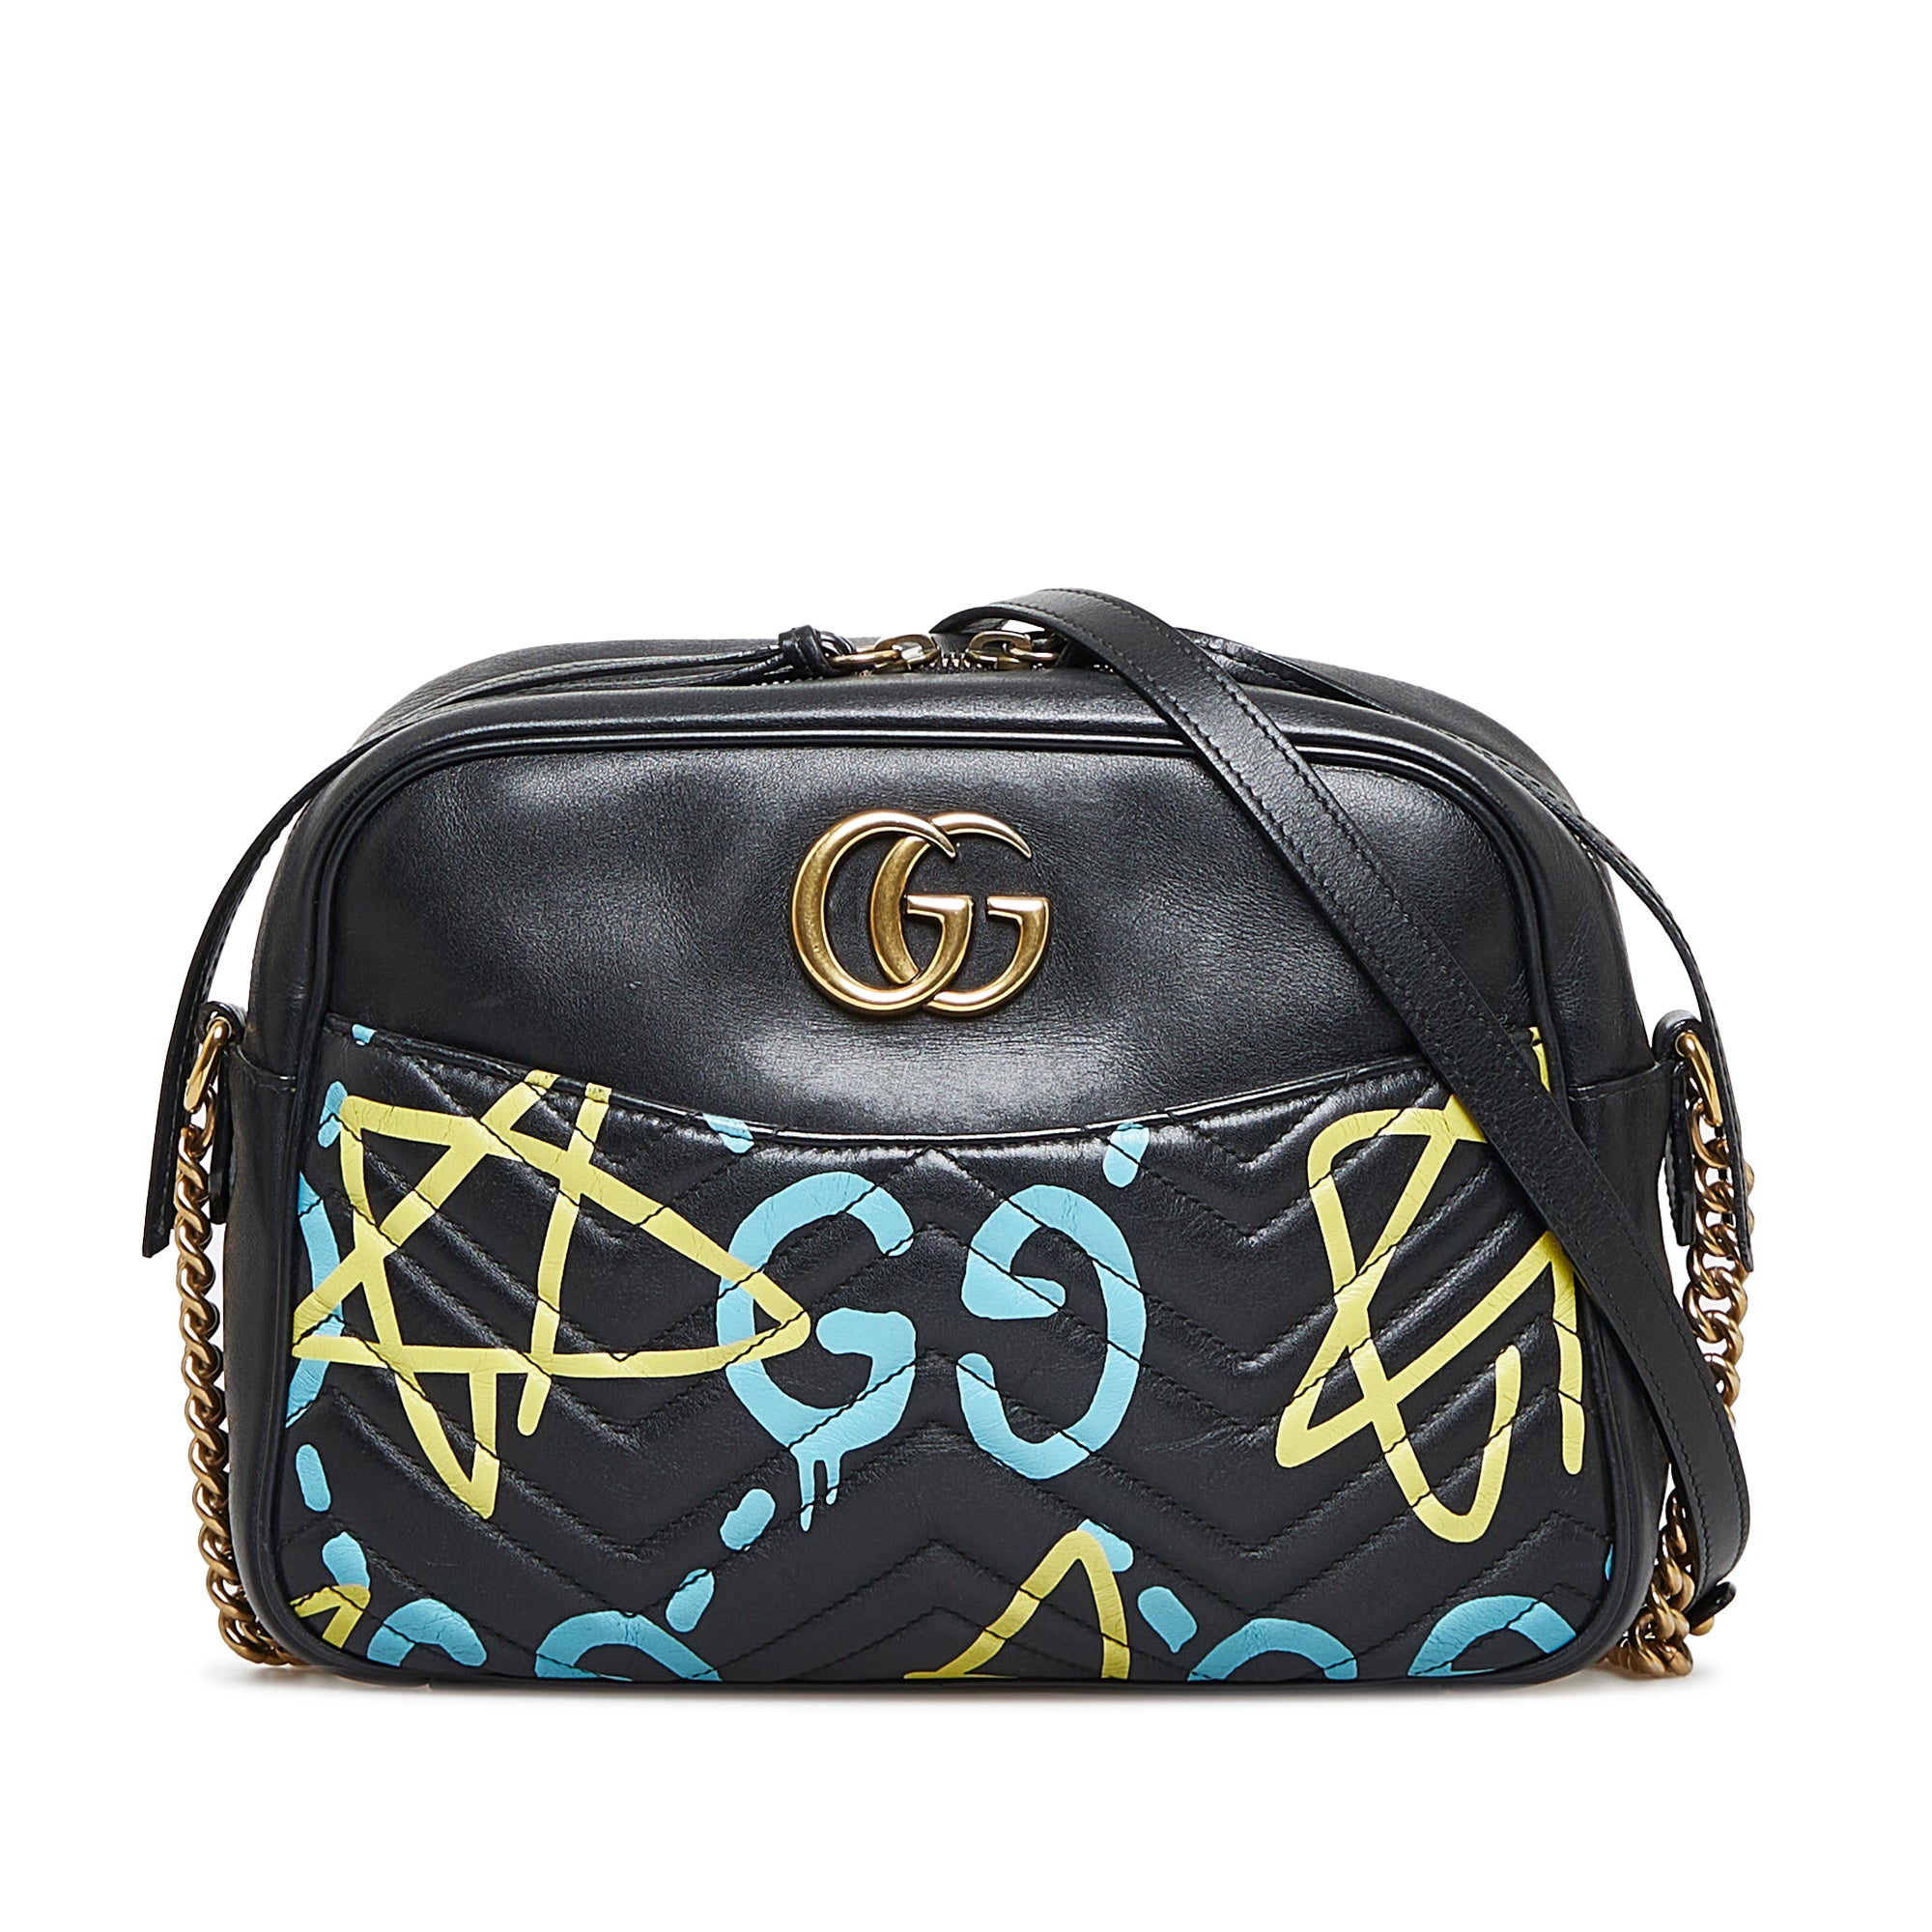 GG GG GG Marmont Ghost Black Stamped Leather